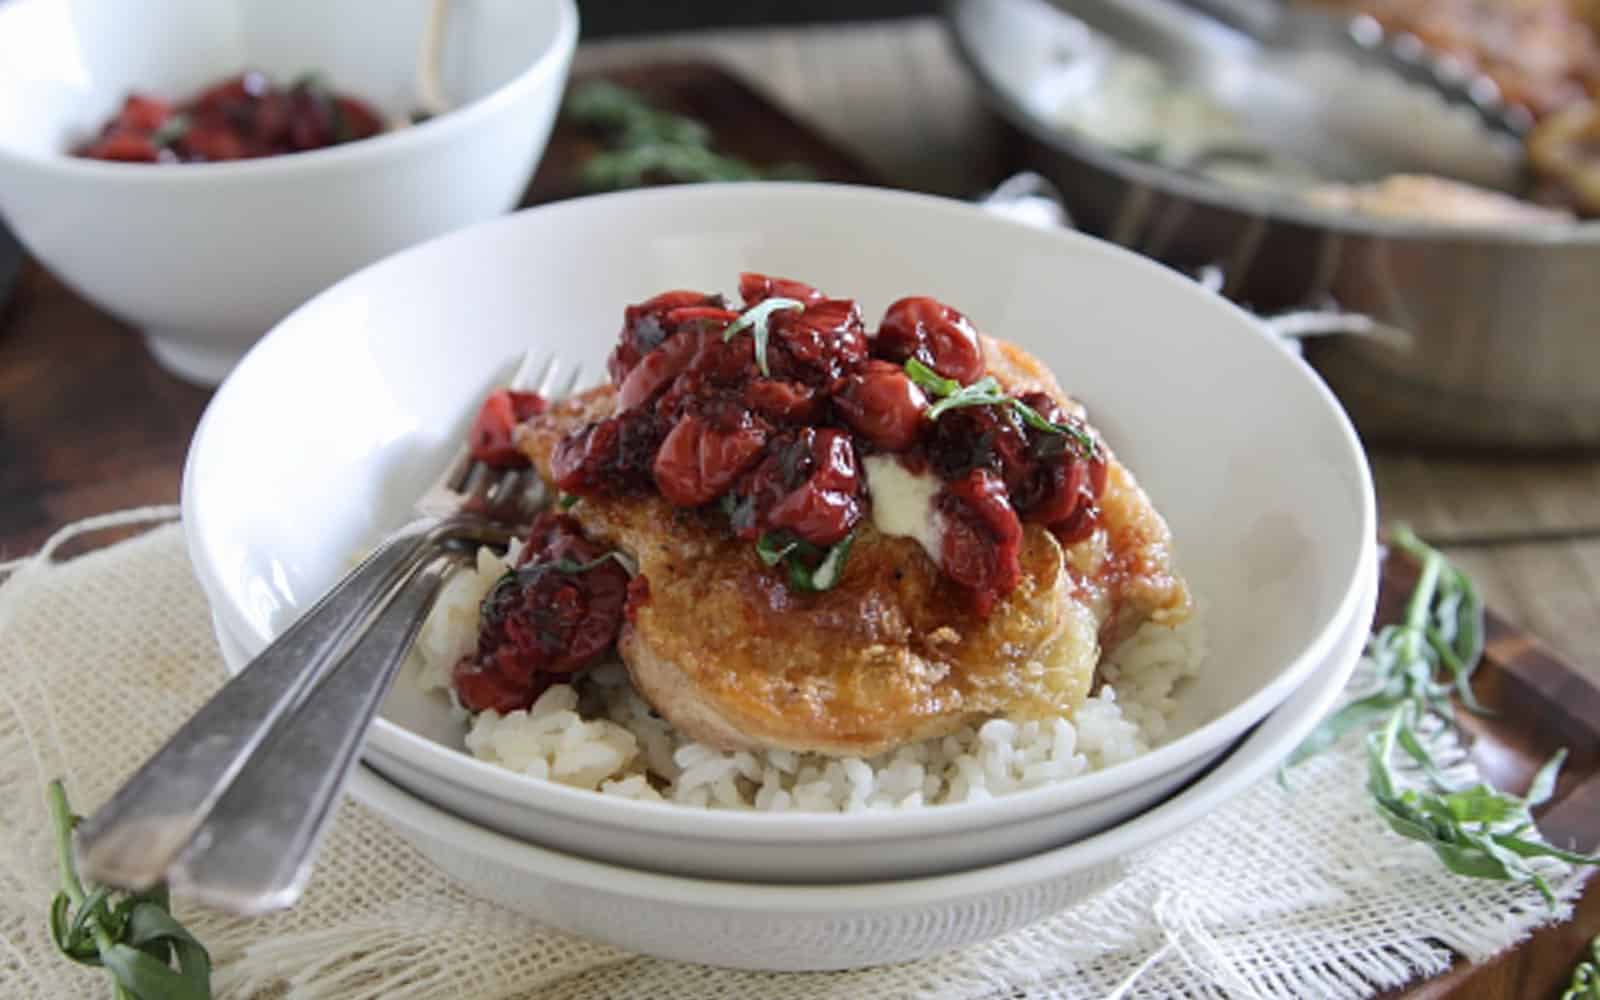 Fried chicken with goat cheese cherry sauce over white rice in a bowl.